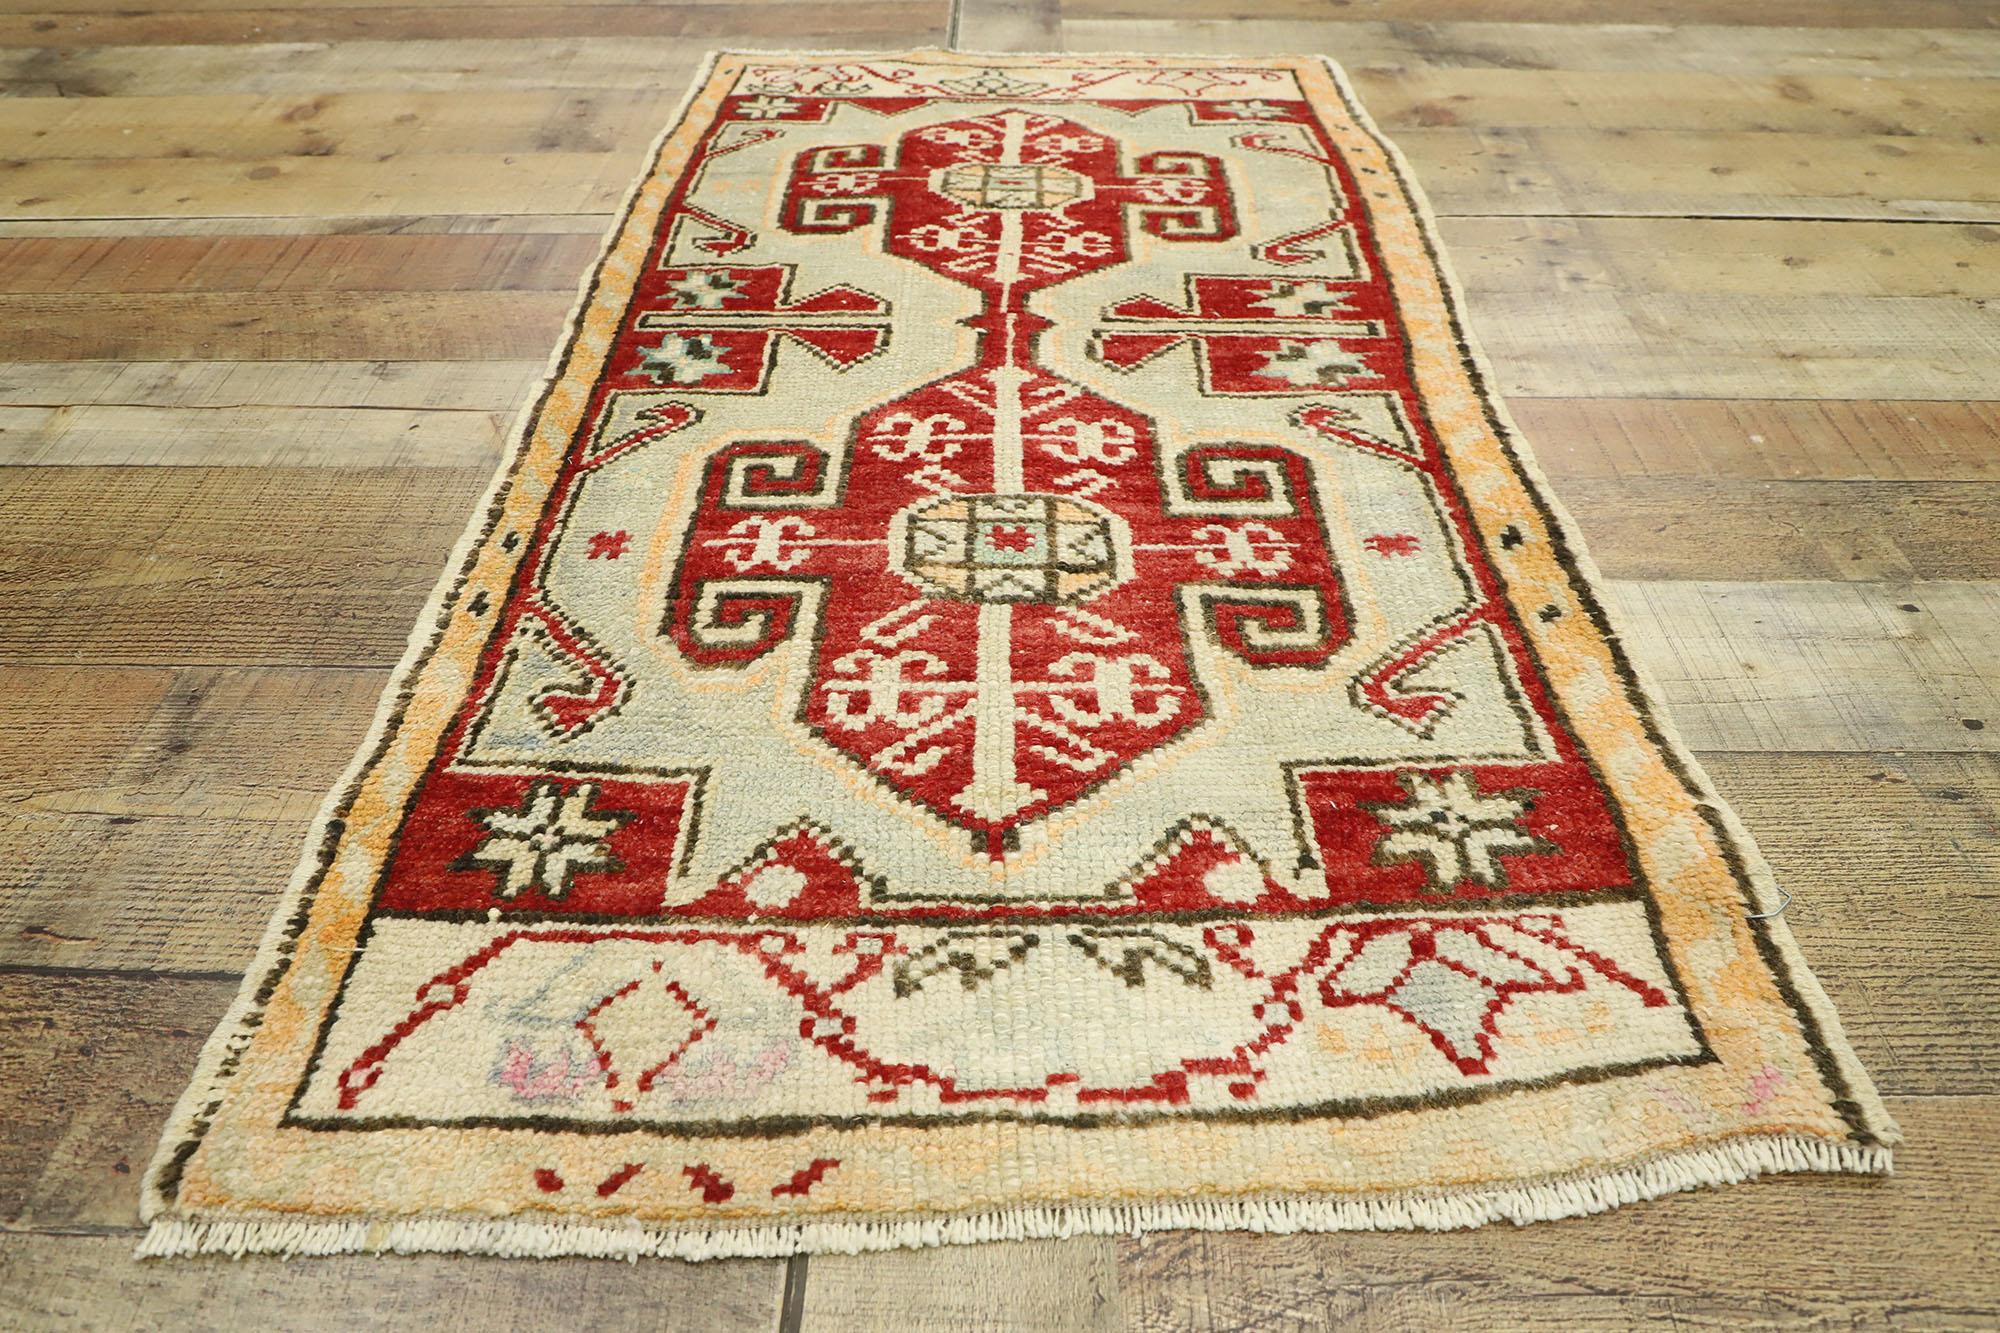 20th Century Vintage Turkish Oushak Yastik Scatter Rug, Small Accent Rug